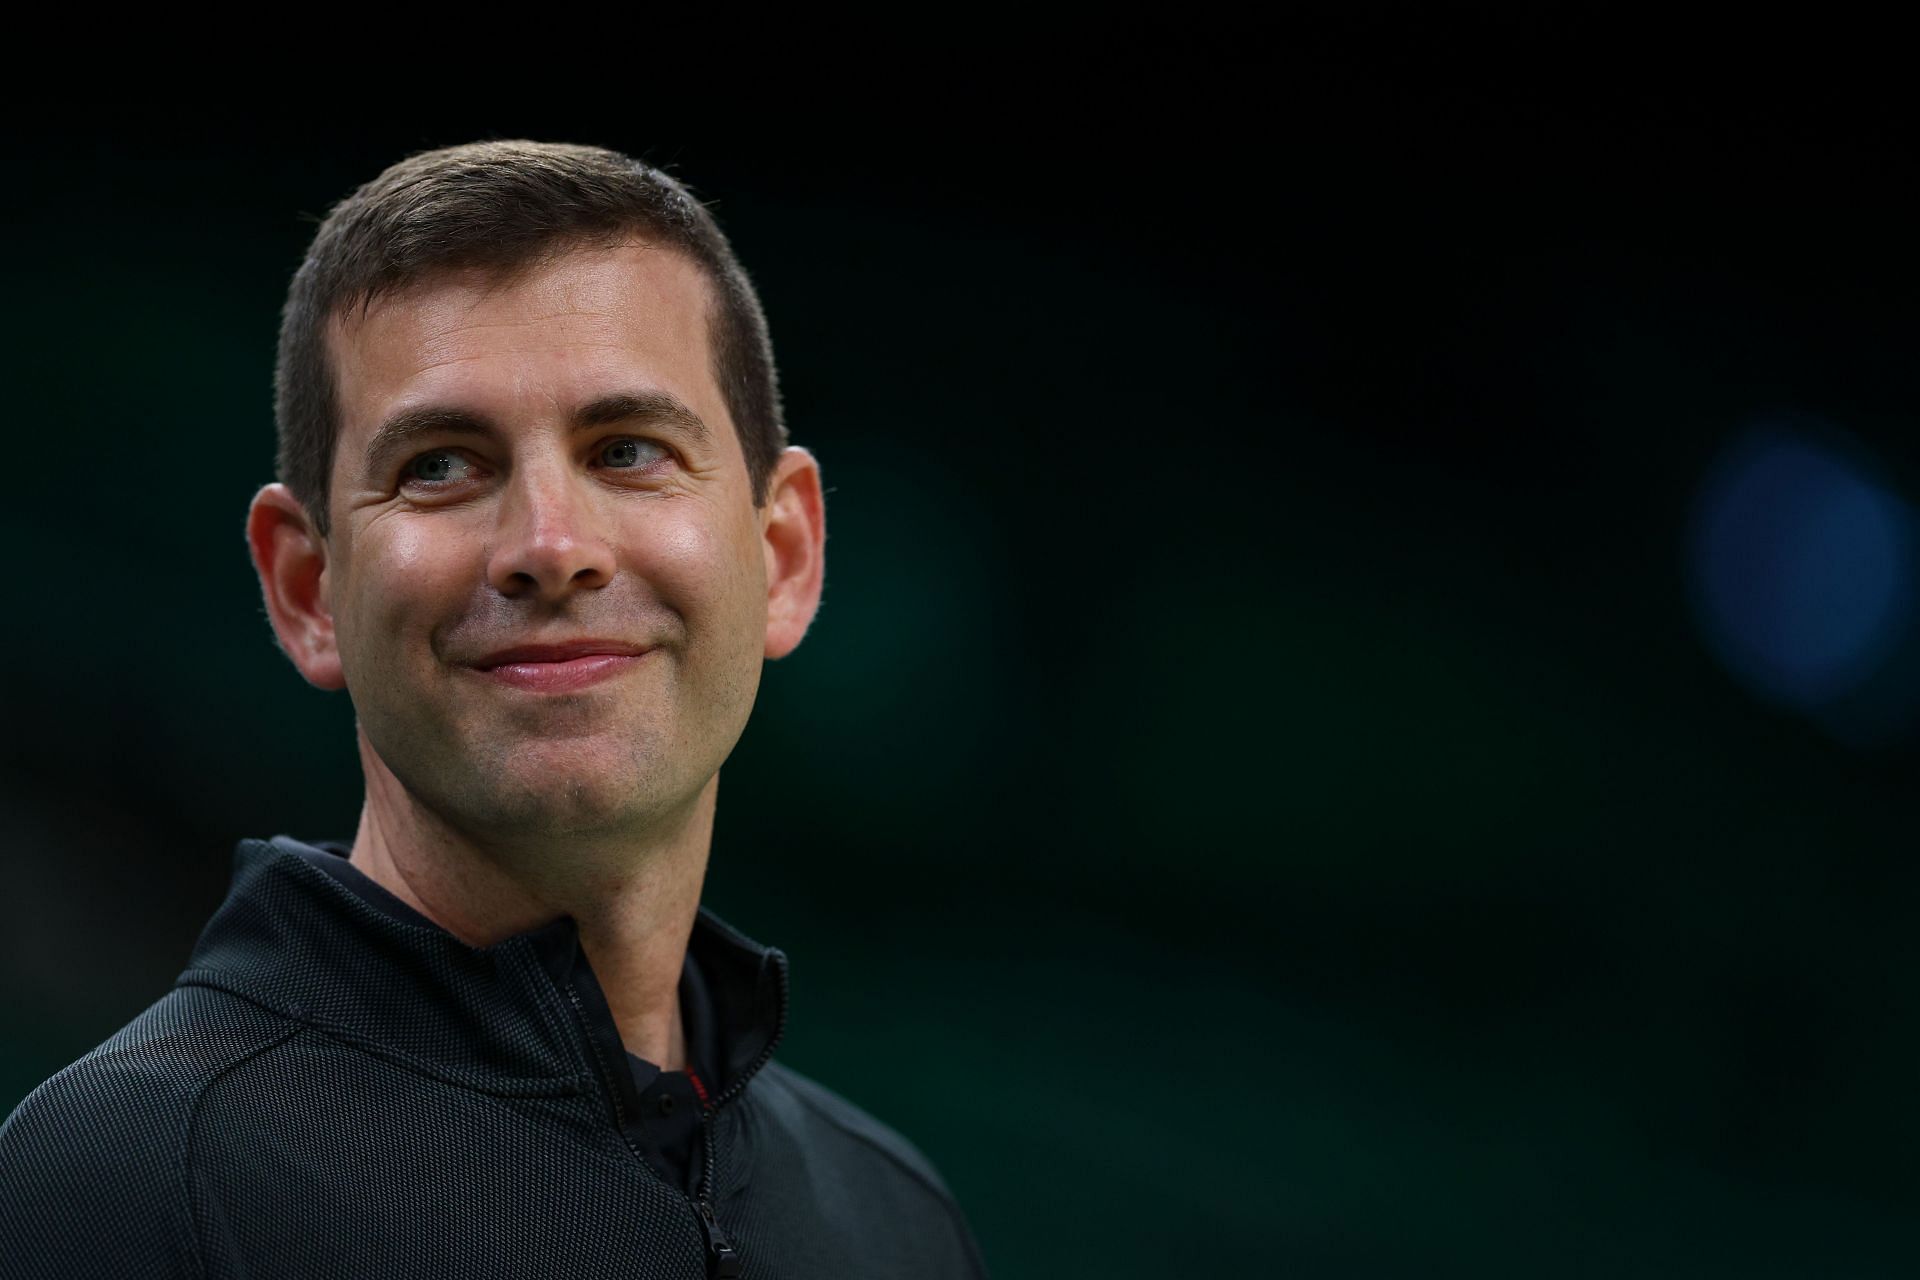 Boston Celtics president of basketball operations Brad Stevens looks on before Game 3 of the Eastern Conference finals against the Miami Heat at TD Garden on May 21 in Boston, Massachusetts.